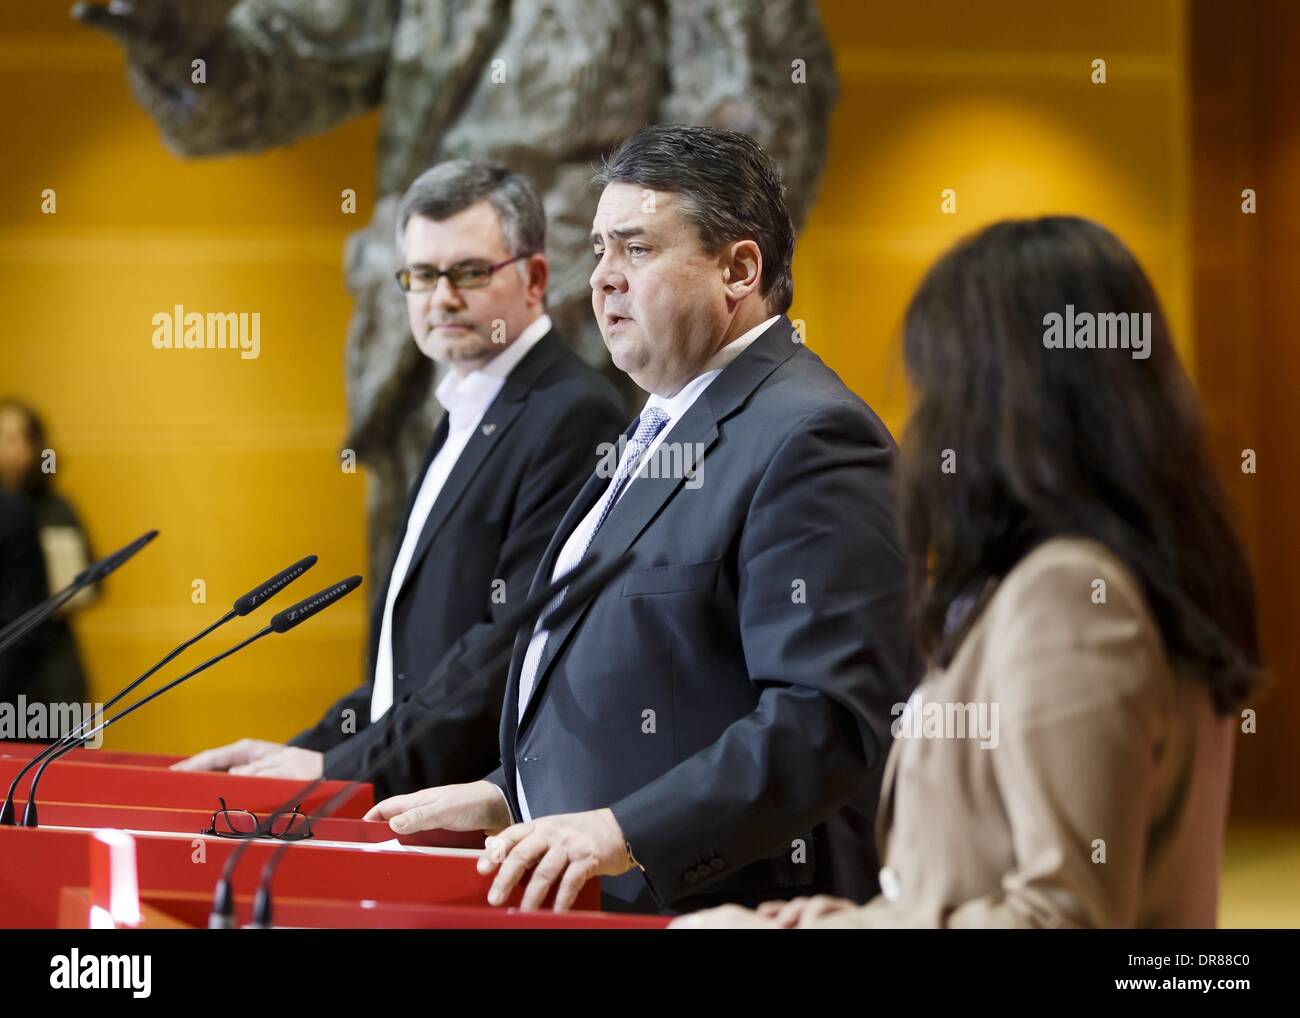 Berlin, Germany. 20th Jan, 2014. SPD Press conference with SPD Chairman Gabriel, the new SPD General Secretary, Fahimi and new SPD Treasurer, Nietan at Willy-Brandt-Haus in Berlin. / Picture: Sigmar Gabriel (SPD), SPD Party Chef and German Minister of Economy and Energy, Yasmin Fahimi (SPD), SPD General Secretary, and Dietmar Nietan (SPD), SPD Treasurer, on January 20, 2014. Credit:  Reynaldo Paganelli/NurPhoto/ZUMAPRESS.com/Alamy Live News Stock Photo